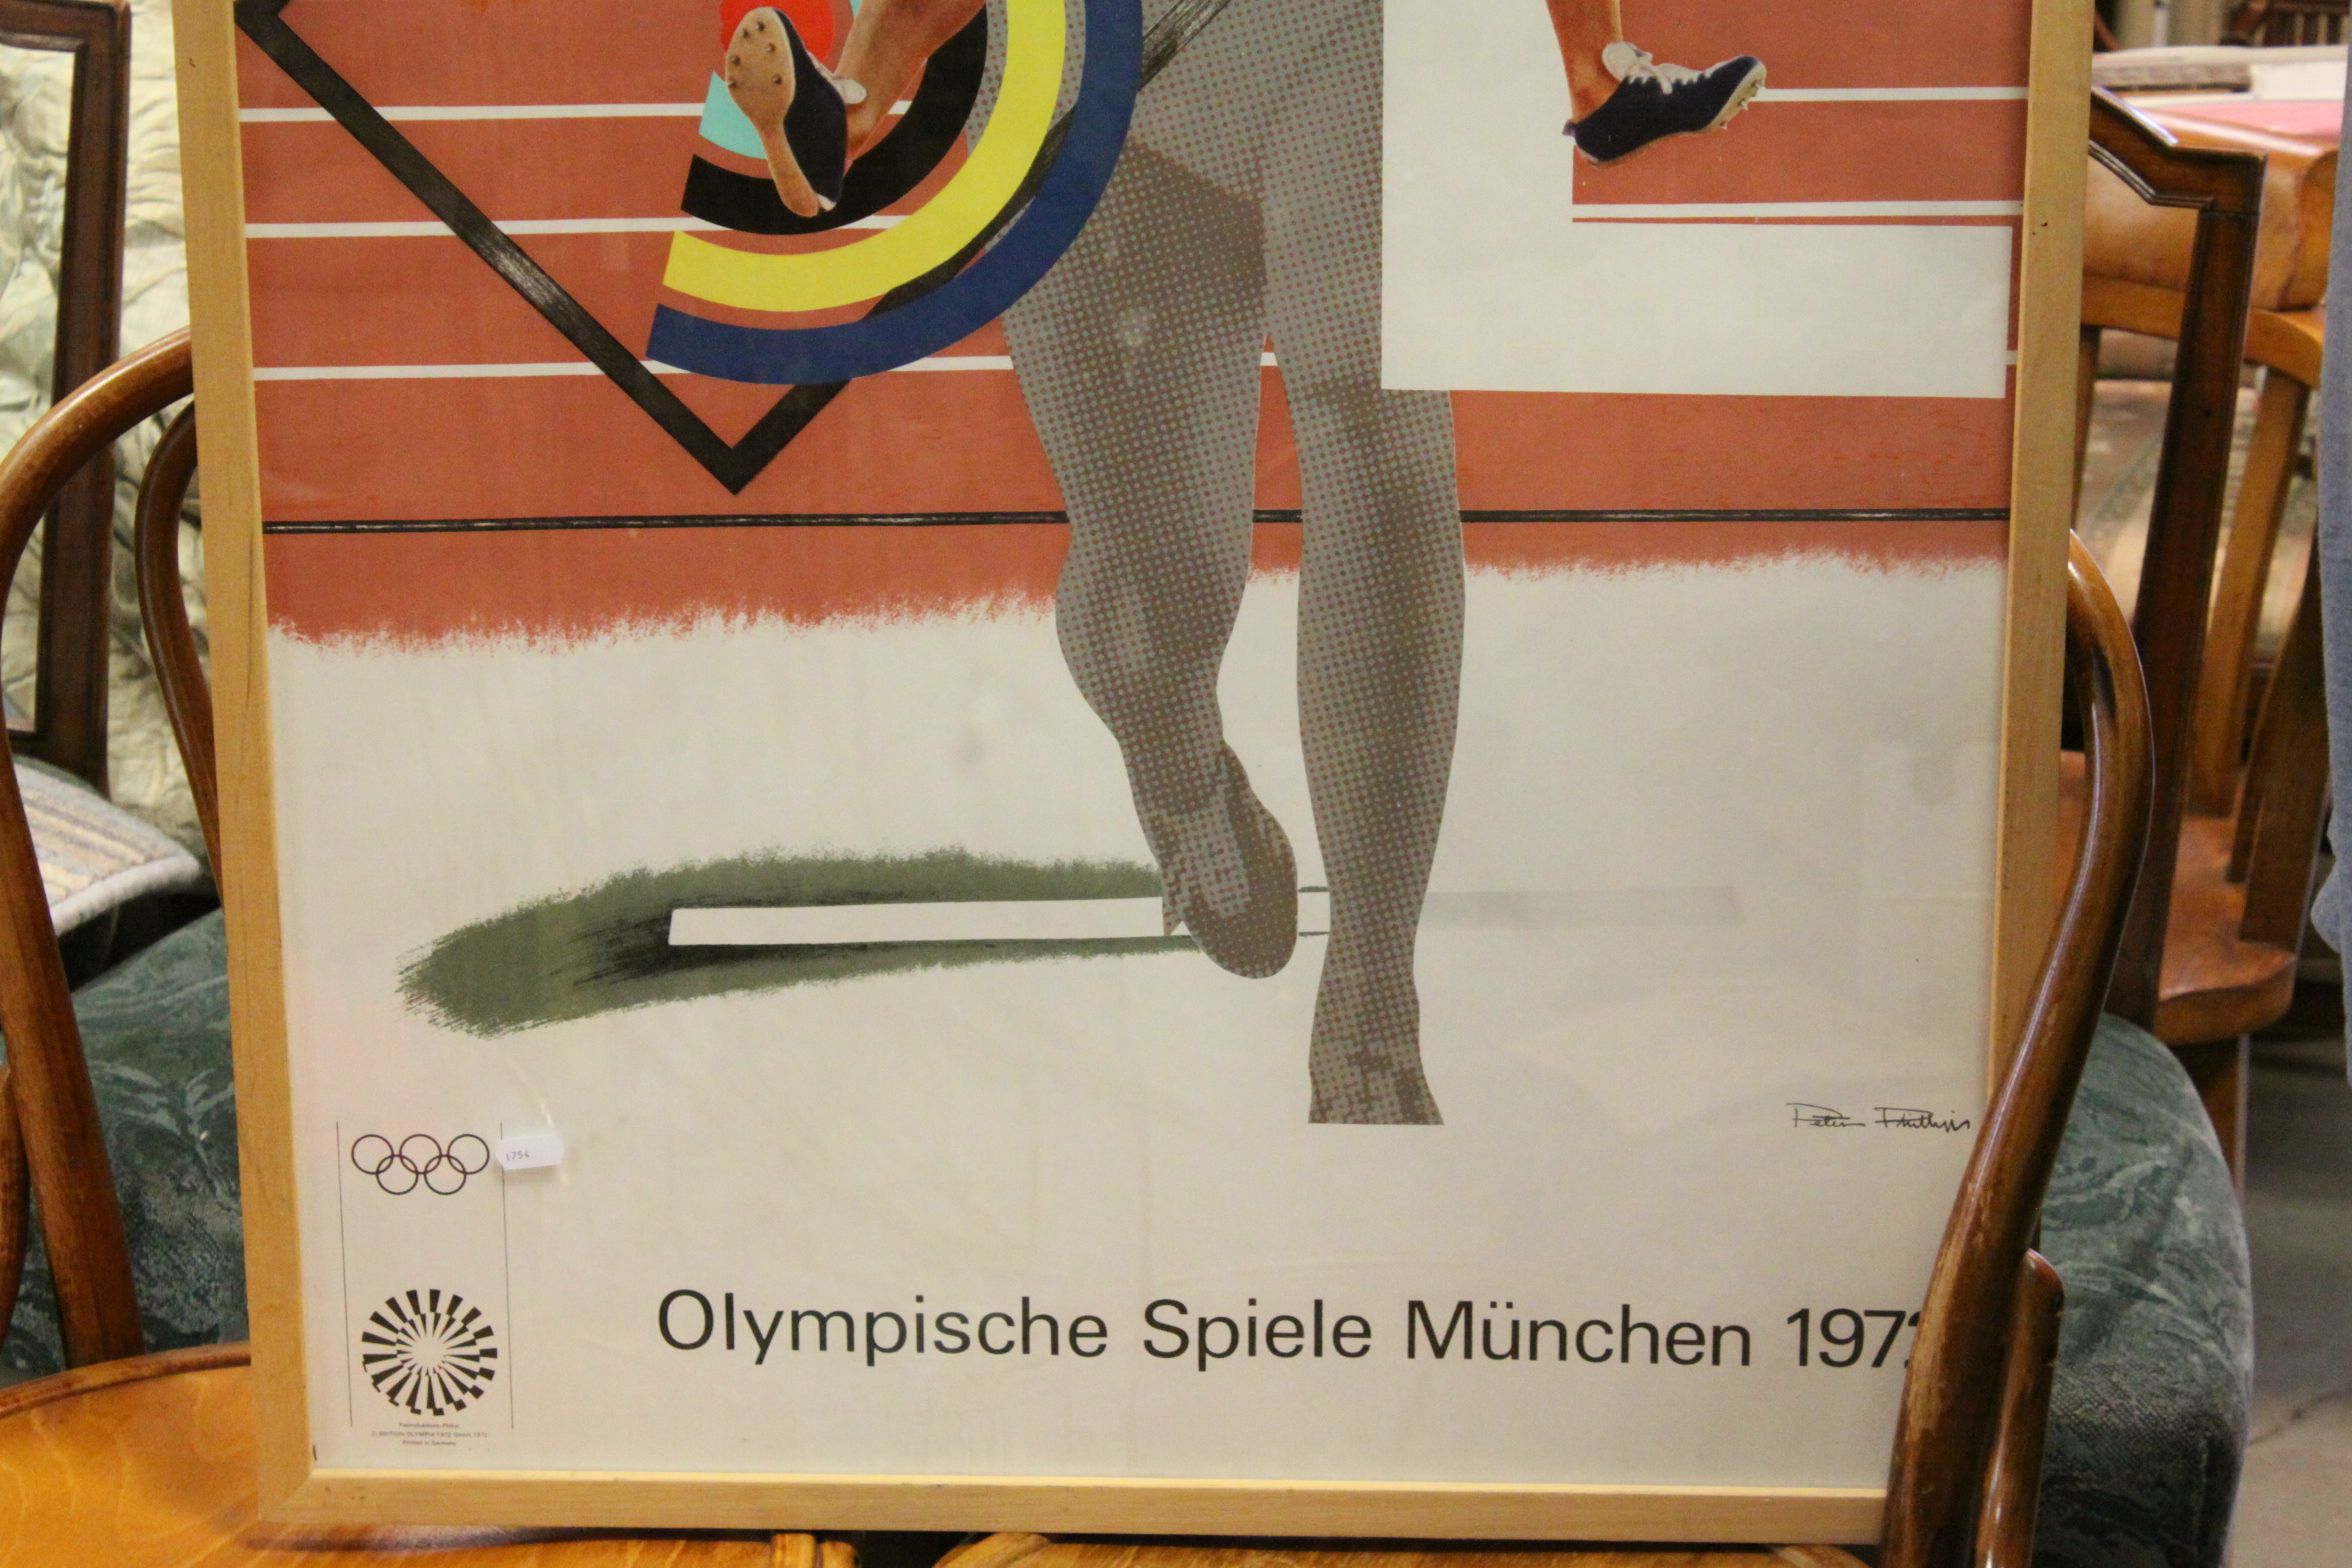 Reproduction Peter Phillips Munich Olympics 1972 Poster, 101cms x 63cms, framed and glazed - Image 3 of 4